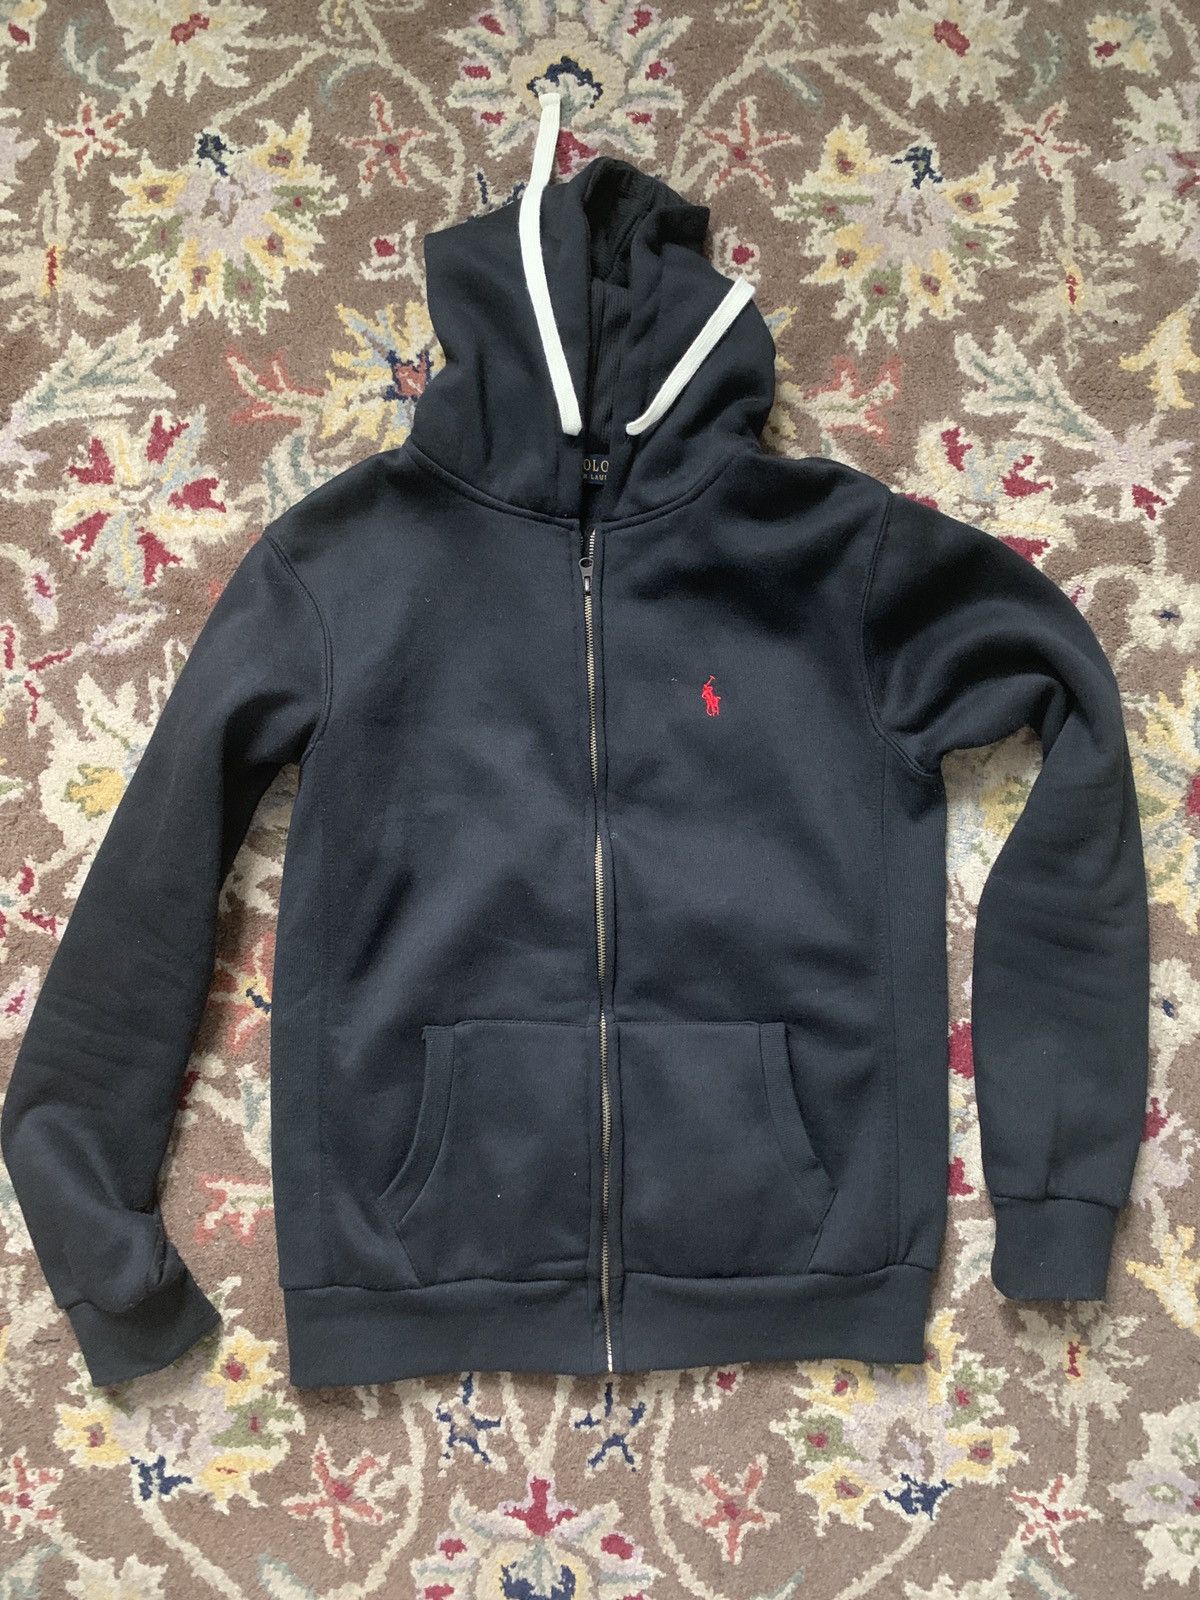 Polo Ralph Lauren Polo Zip Up Hoodie Size US M / EU 48-50 / 2 - 1 Preview